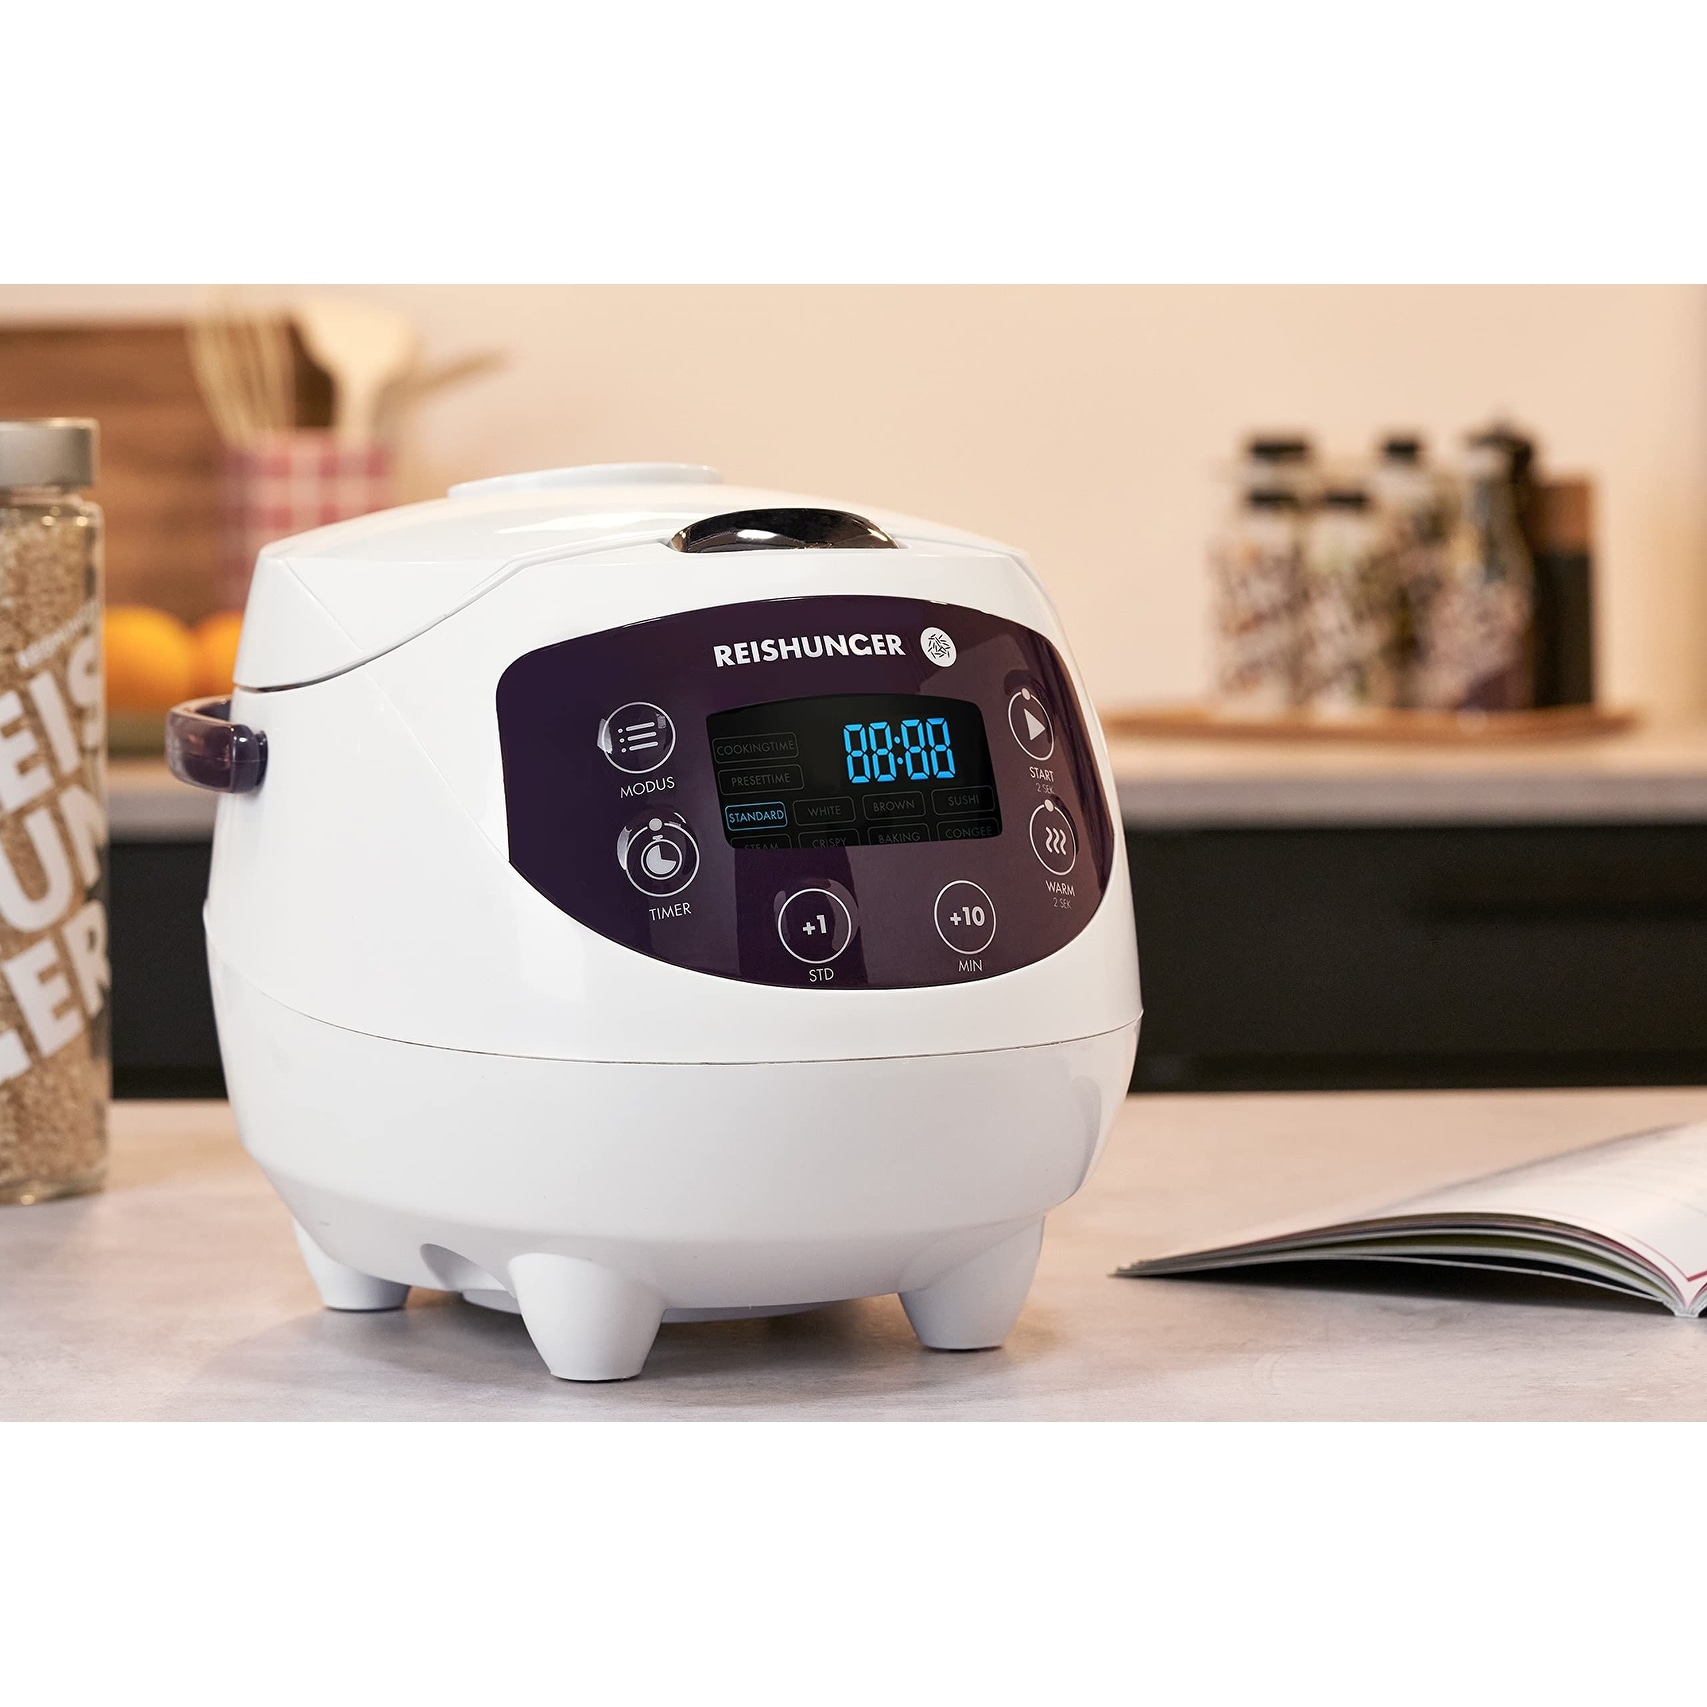 https://ak1.ostkcdn.com/images/products/is/images/direct/2f2edbbc222a0d1216a34868ba29ea8cb595396e/Digital-Mini-Rice-Cooker-%26-Steamer%2C-with-Keep-Warm-Function-%26-Timer%2C-3.5-Cups-Small-Rice-Cooker-with-Ceramic-Inner-Pot.jpg